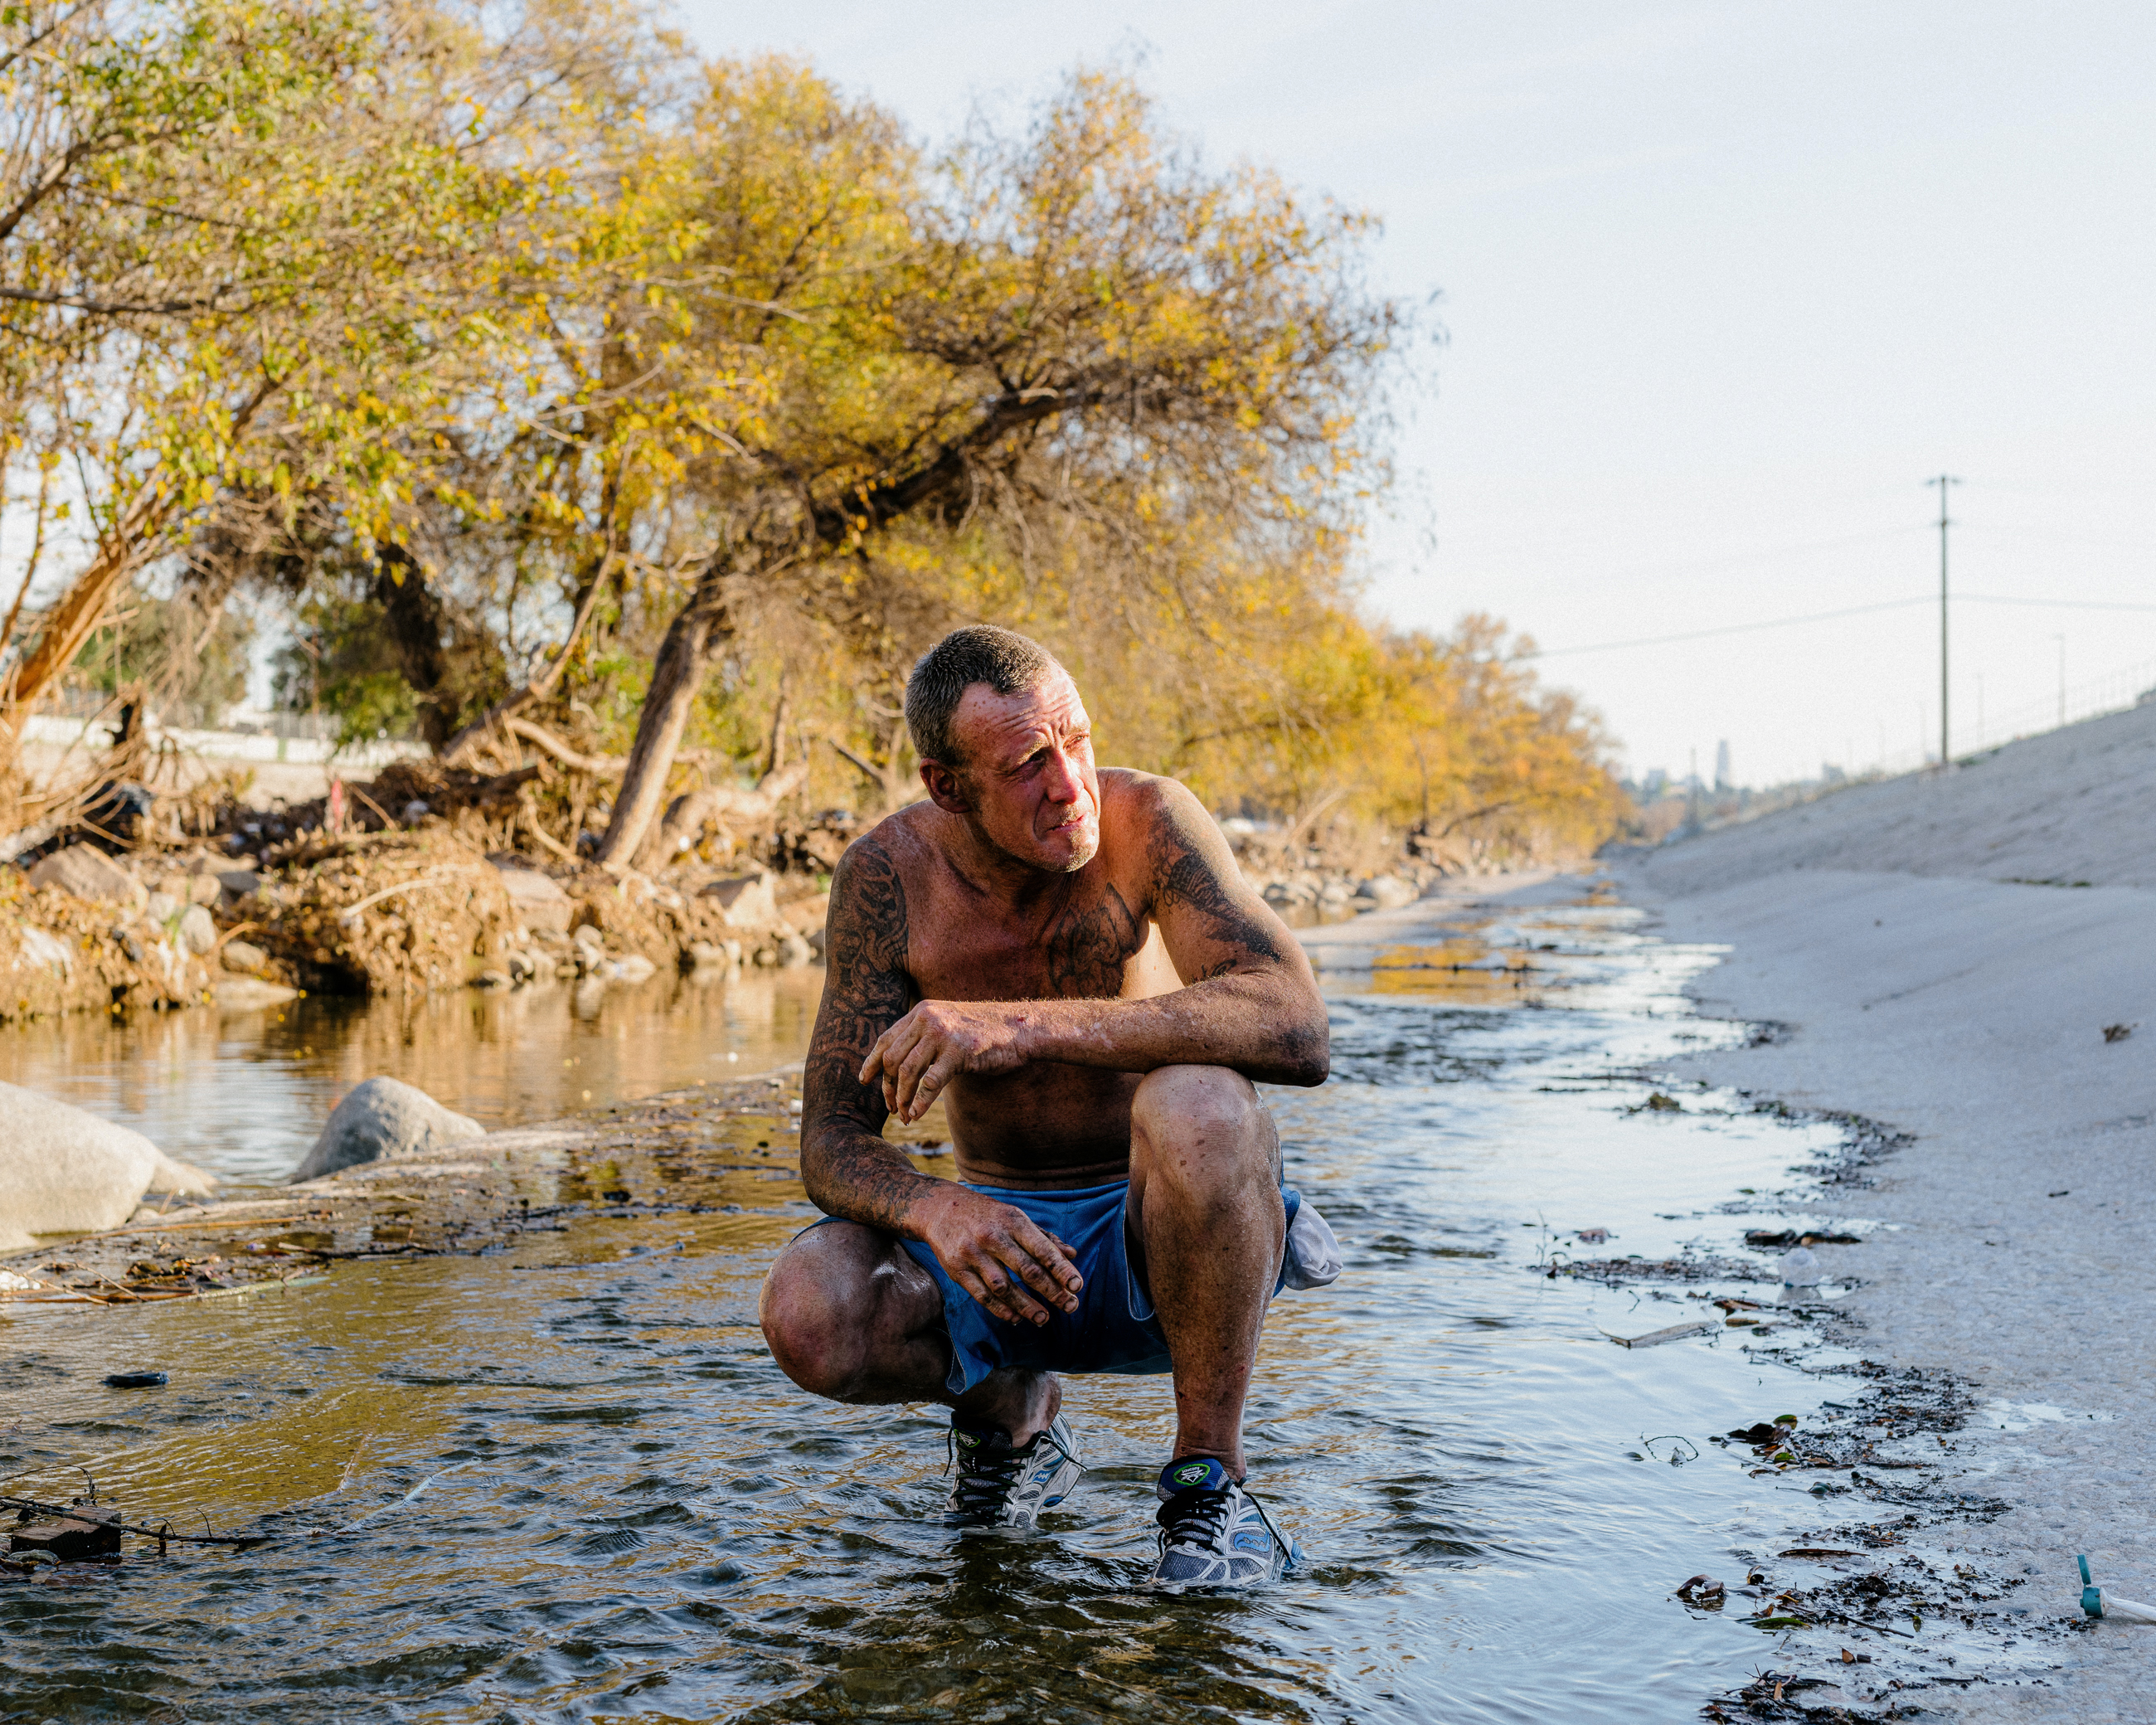 A man bathing in the river - Atwater, 2018